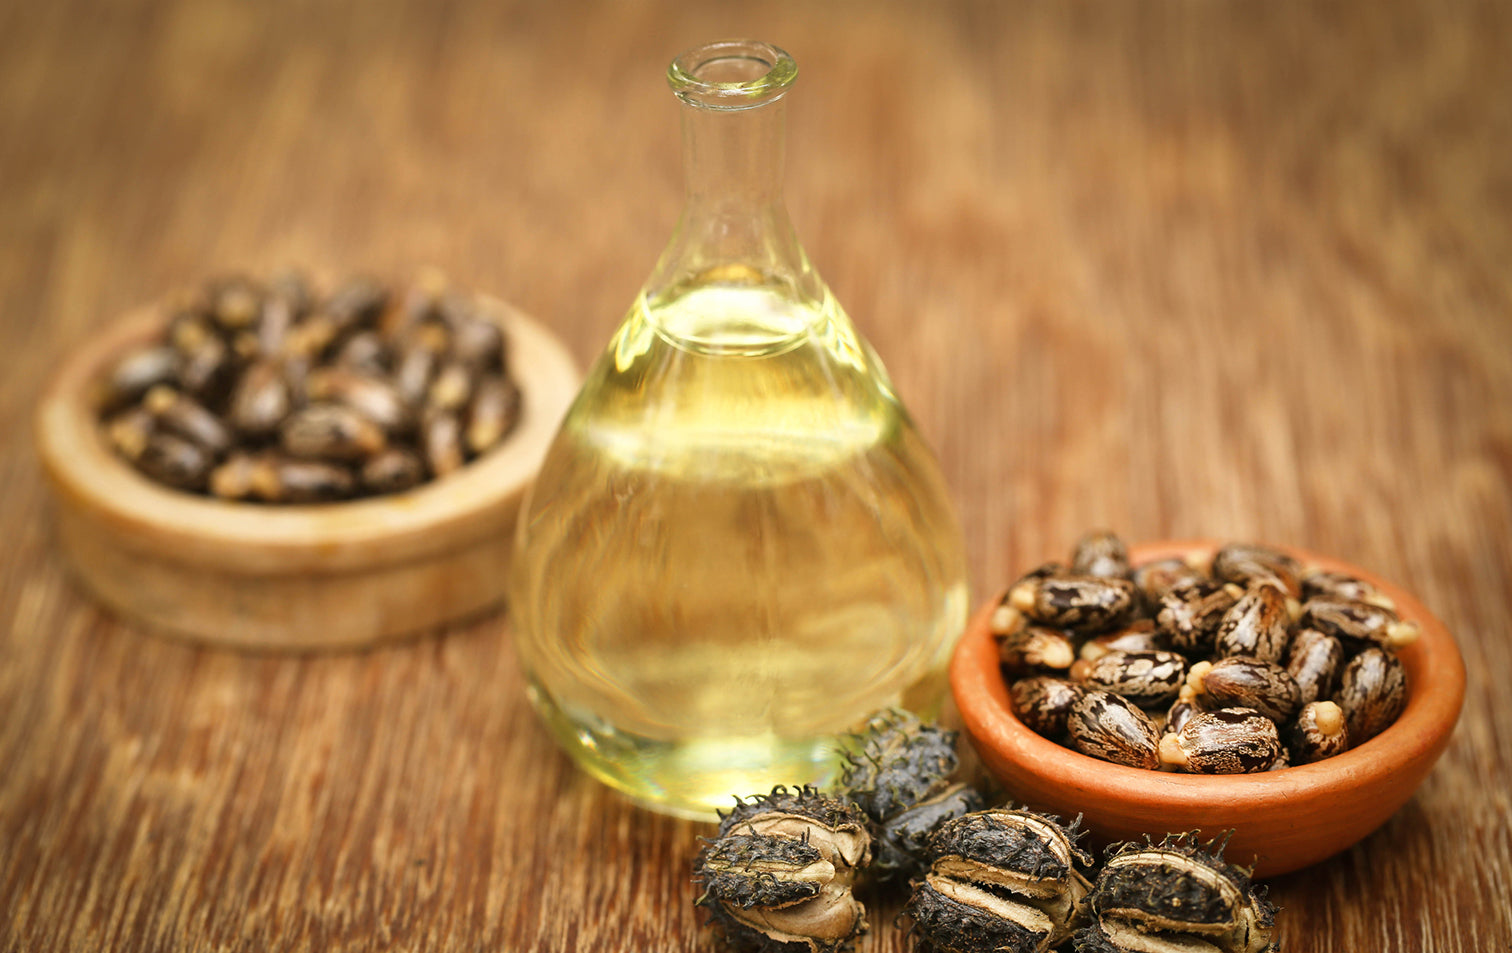 Benefits of Castor Oil - Does It Help With Hair Growth?